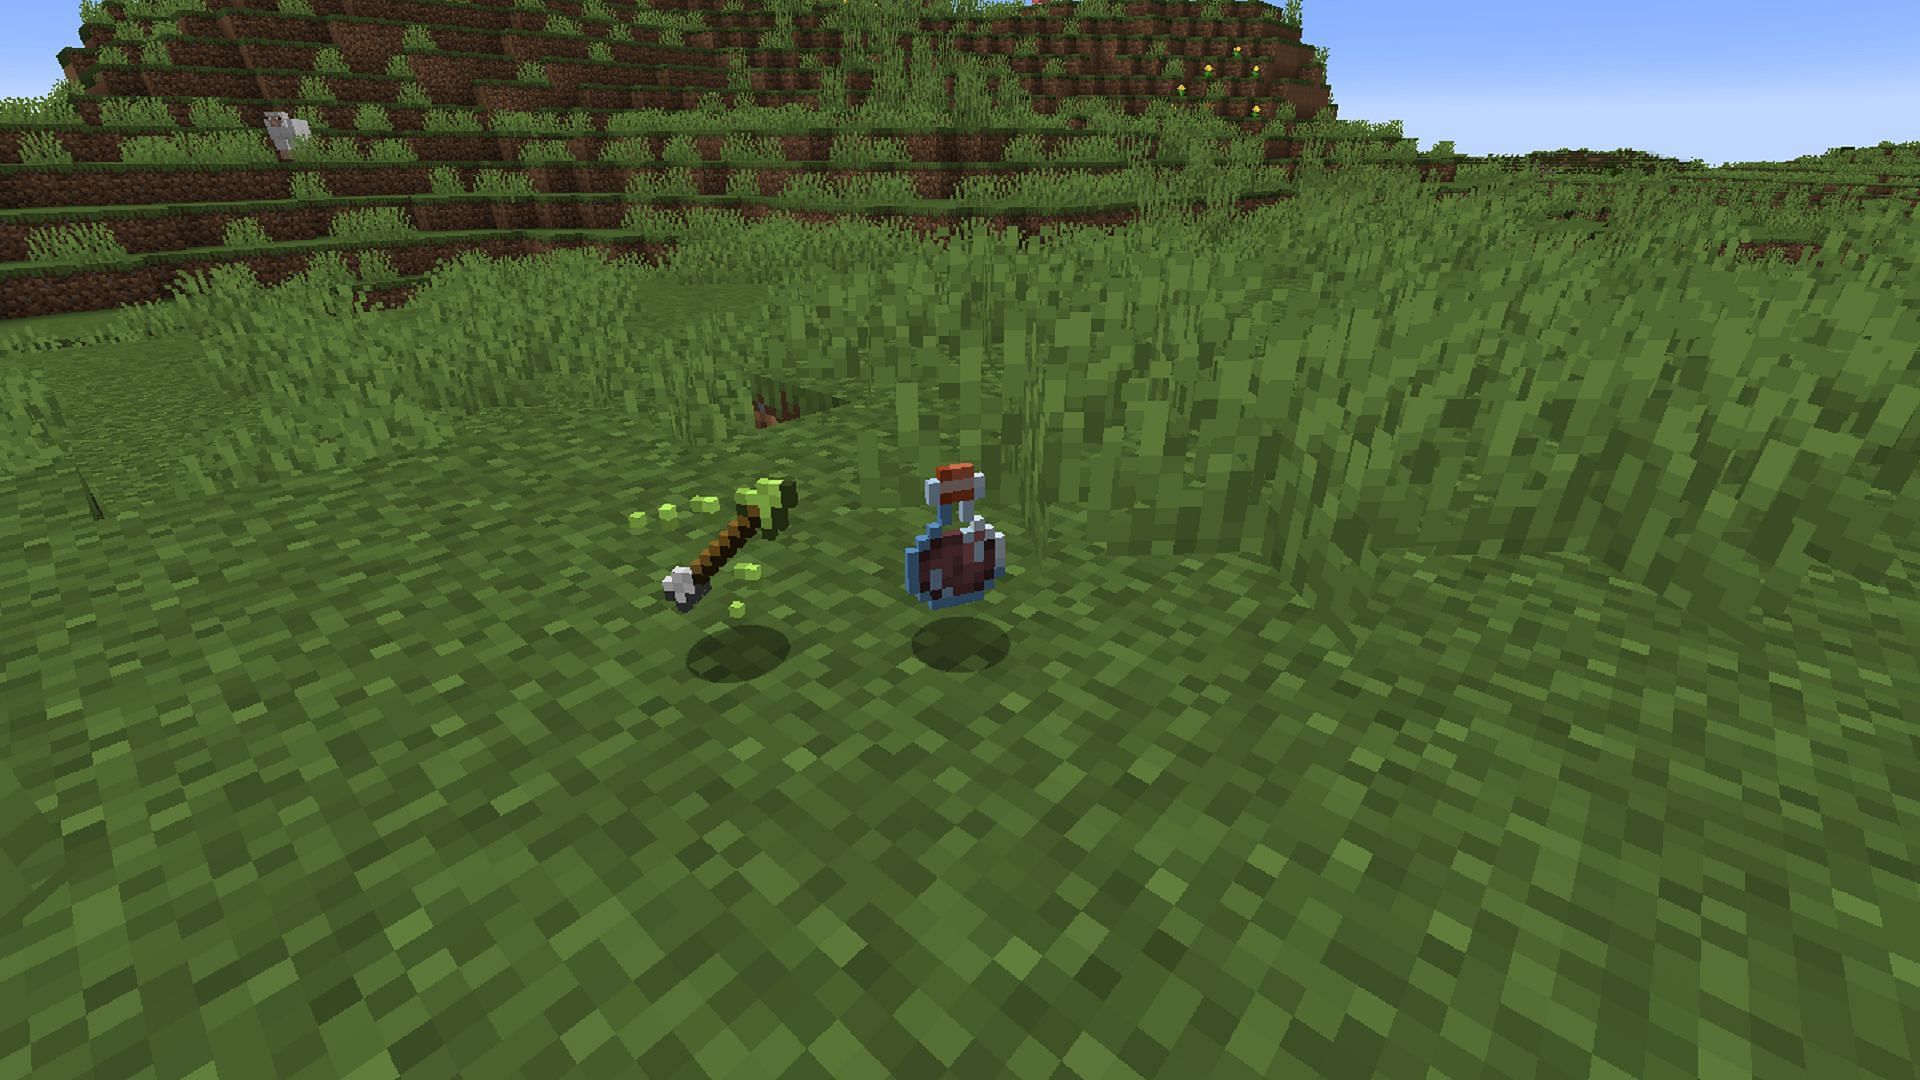 The appearance of many potions and tipped arrows have been reworked in this Minecraft snapshot (Image via Mojang)